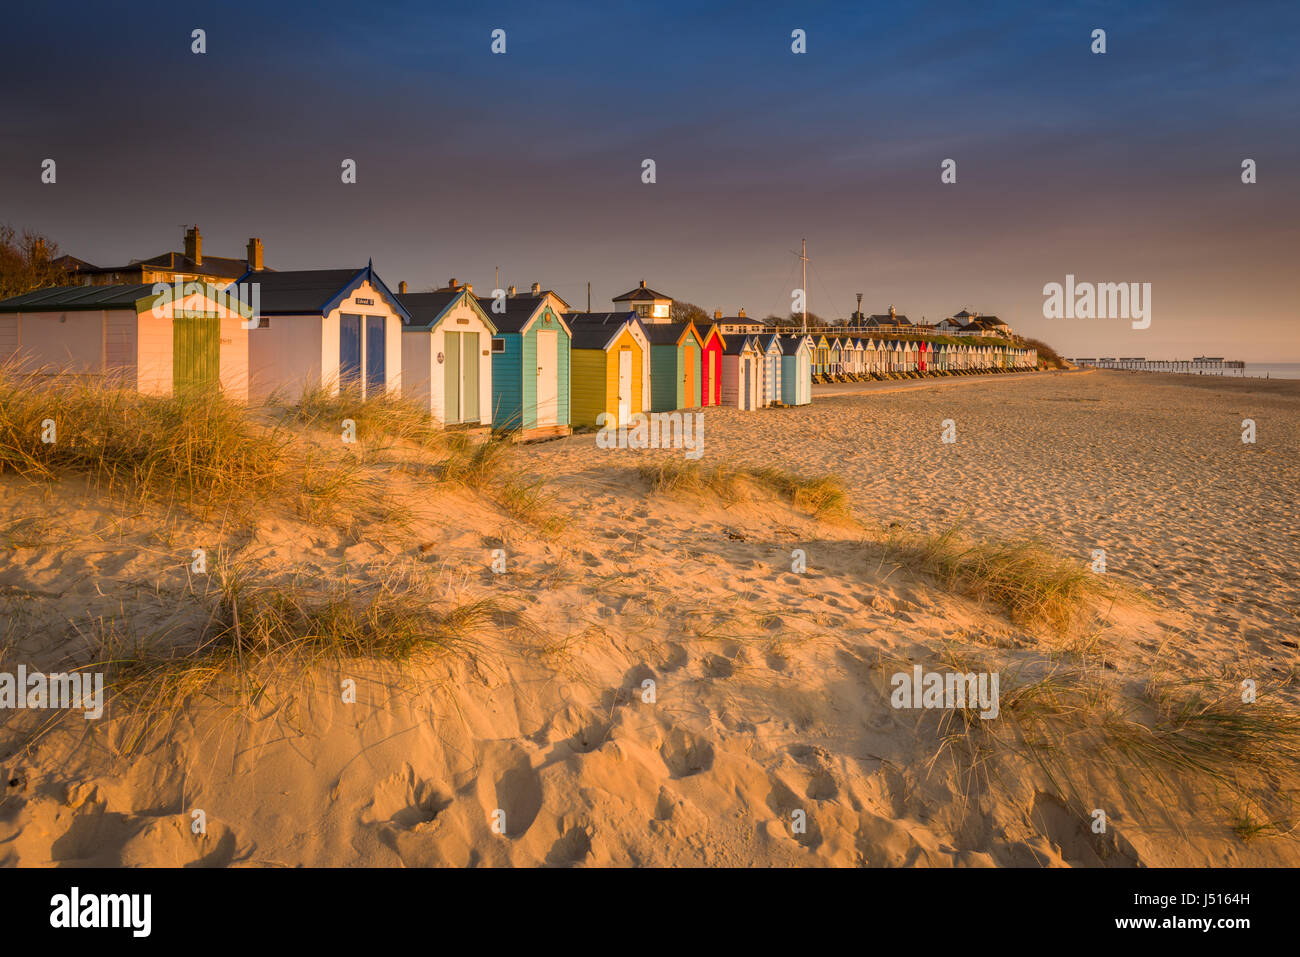 After a cold clear night, there's a beautiful sunrise over the famous line of beach huts on the dunes at the Suffolk seaside town of Southwold. Stock Photo